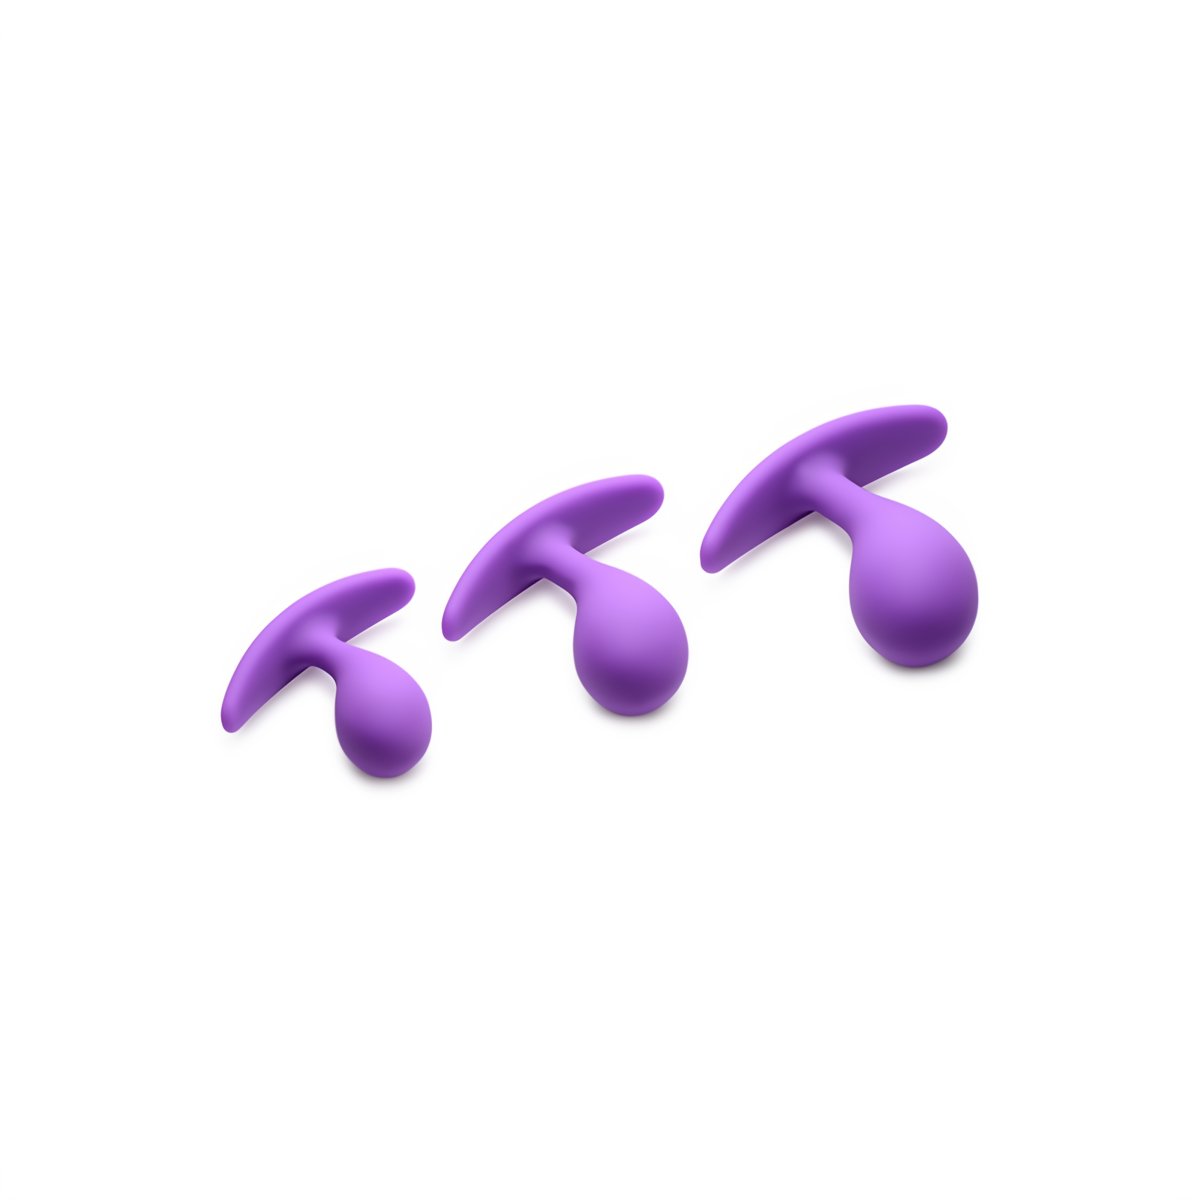 Booty Poppers - Silicone Anal Trainer Set - EroticToyzProducten,Toys,Anaal Toys,Buttplugs Anale Dildo's,Buttplugs Anale Dildo's Niet Vibrerend,,GeslachtsneutraalXR Brands